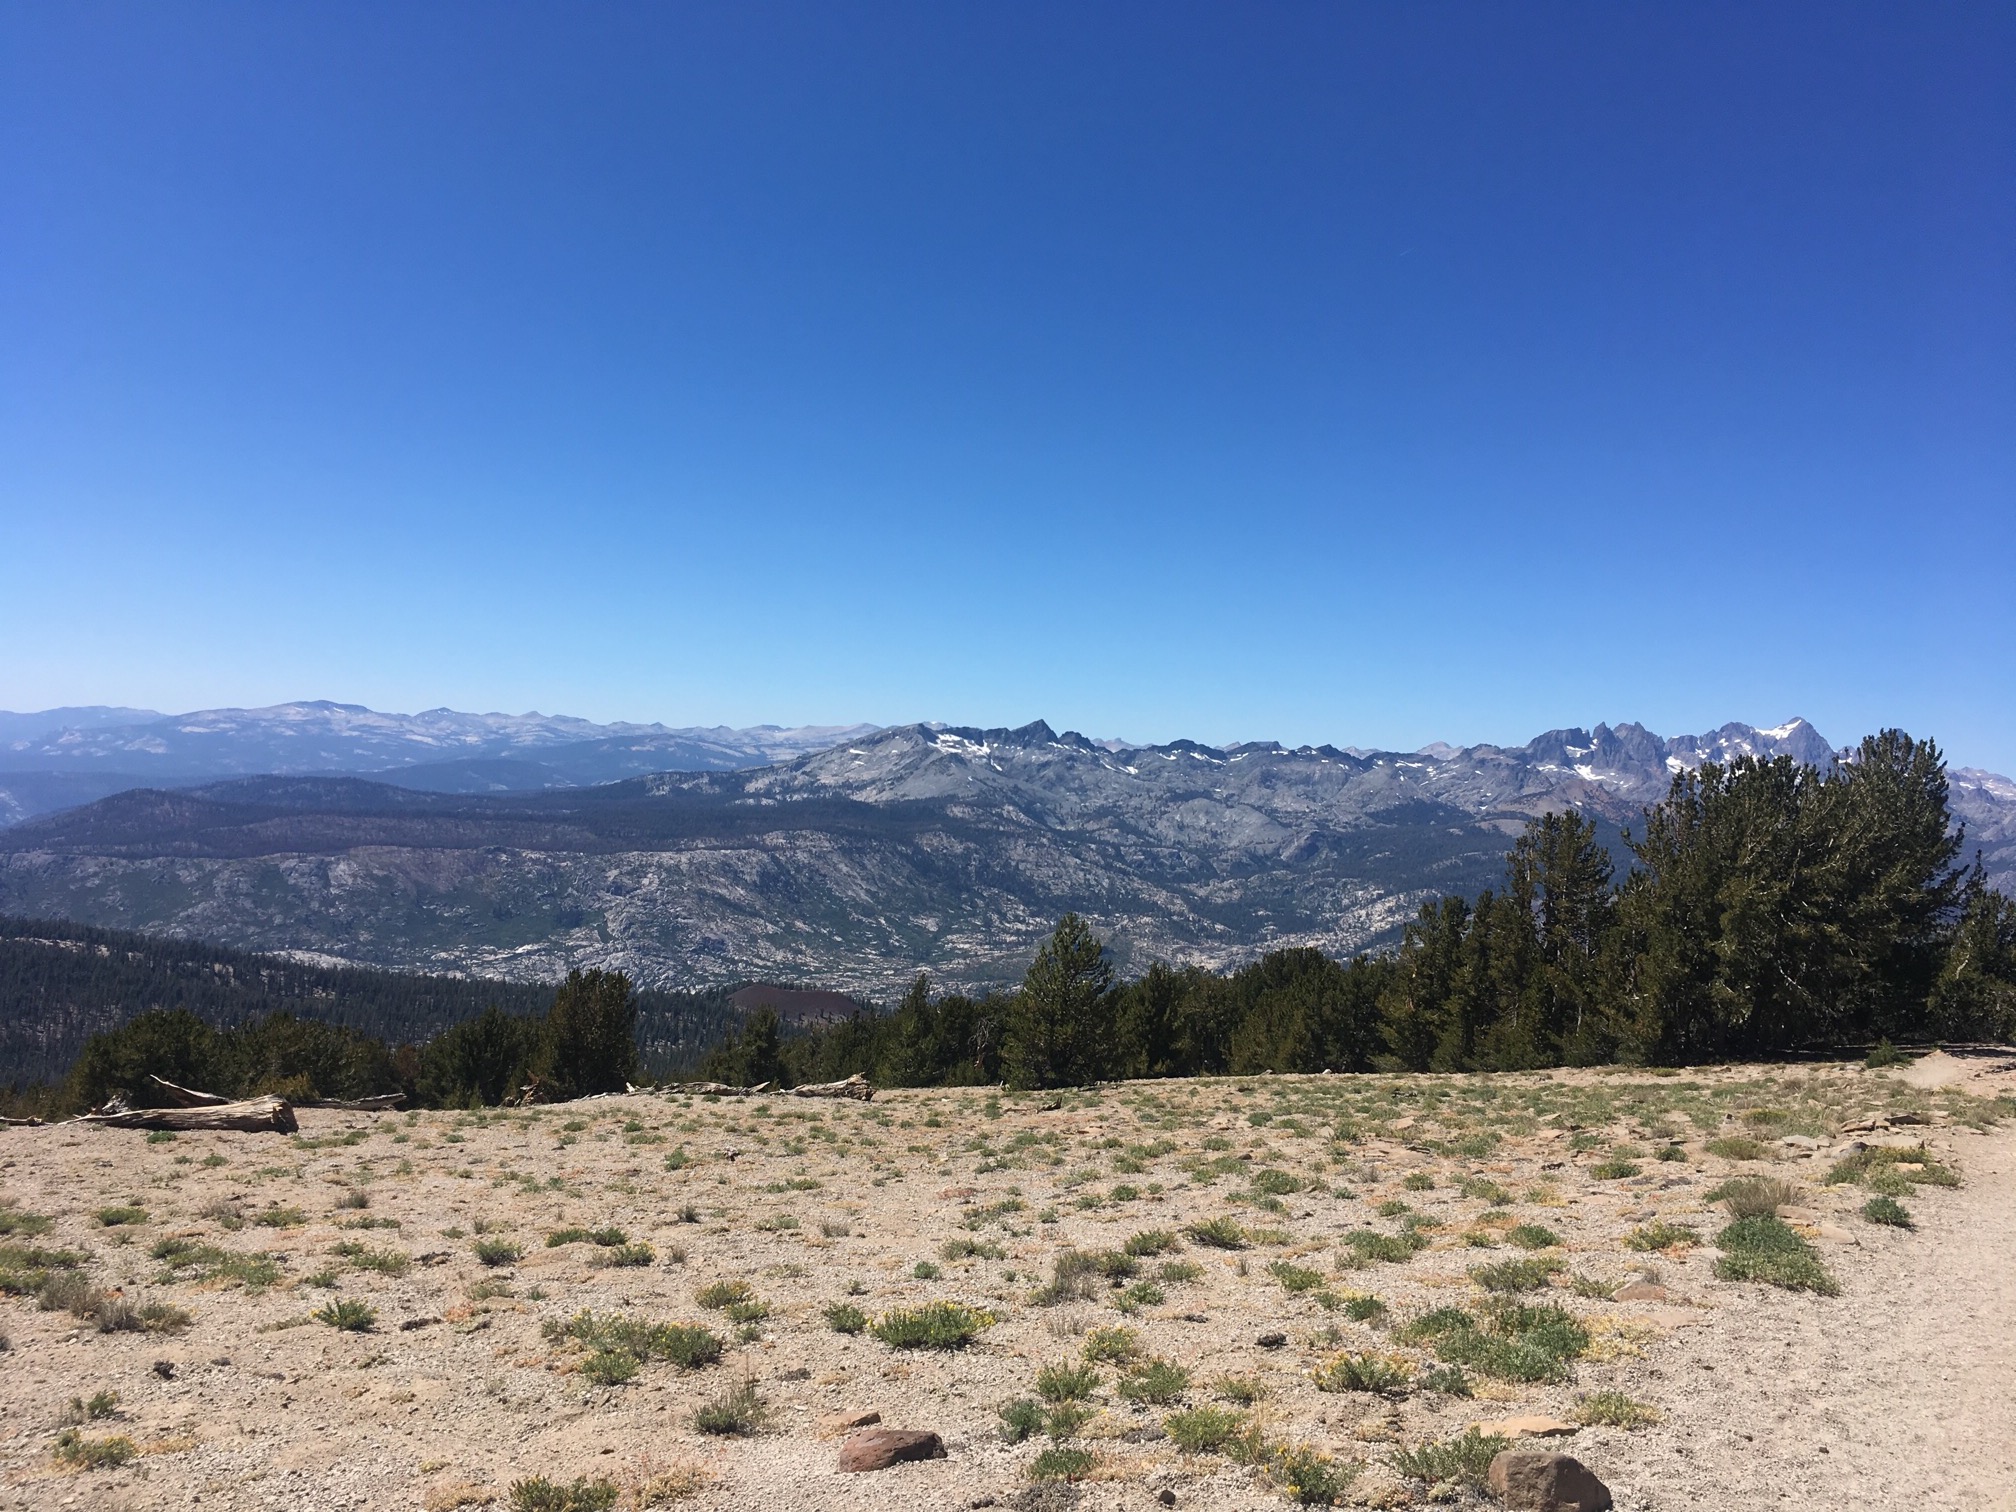 Expansive views from Rim Trail